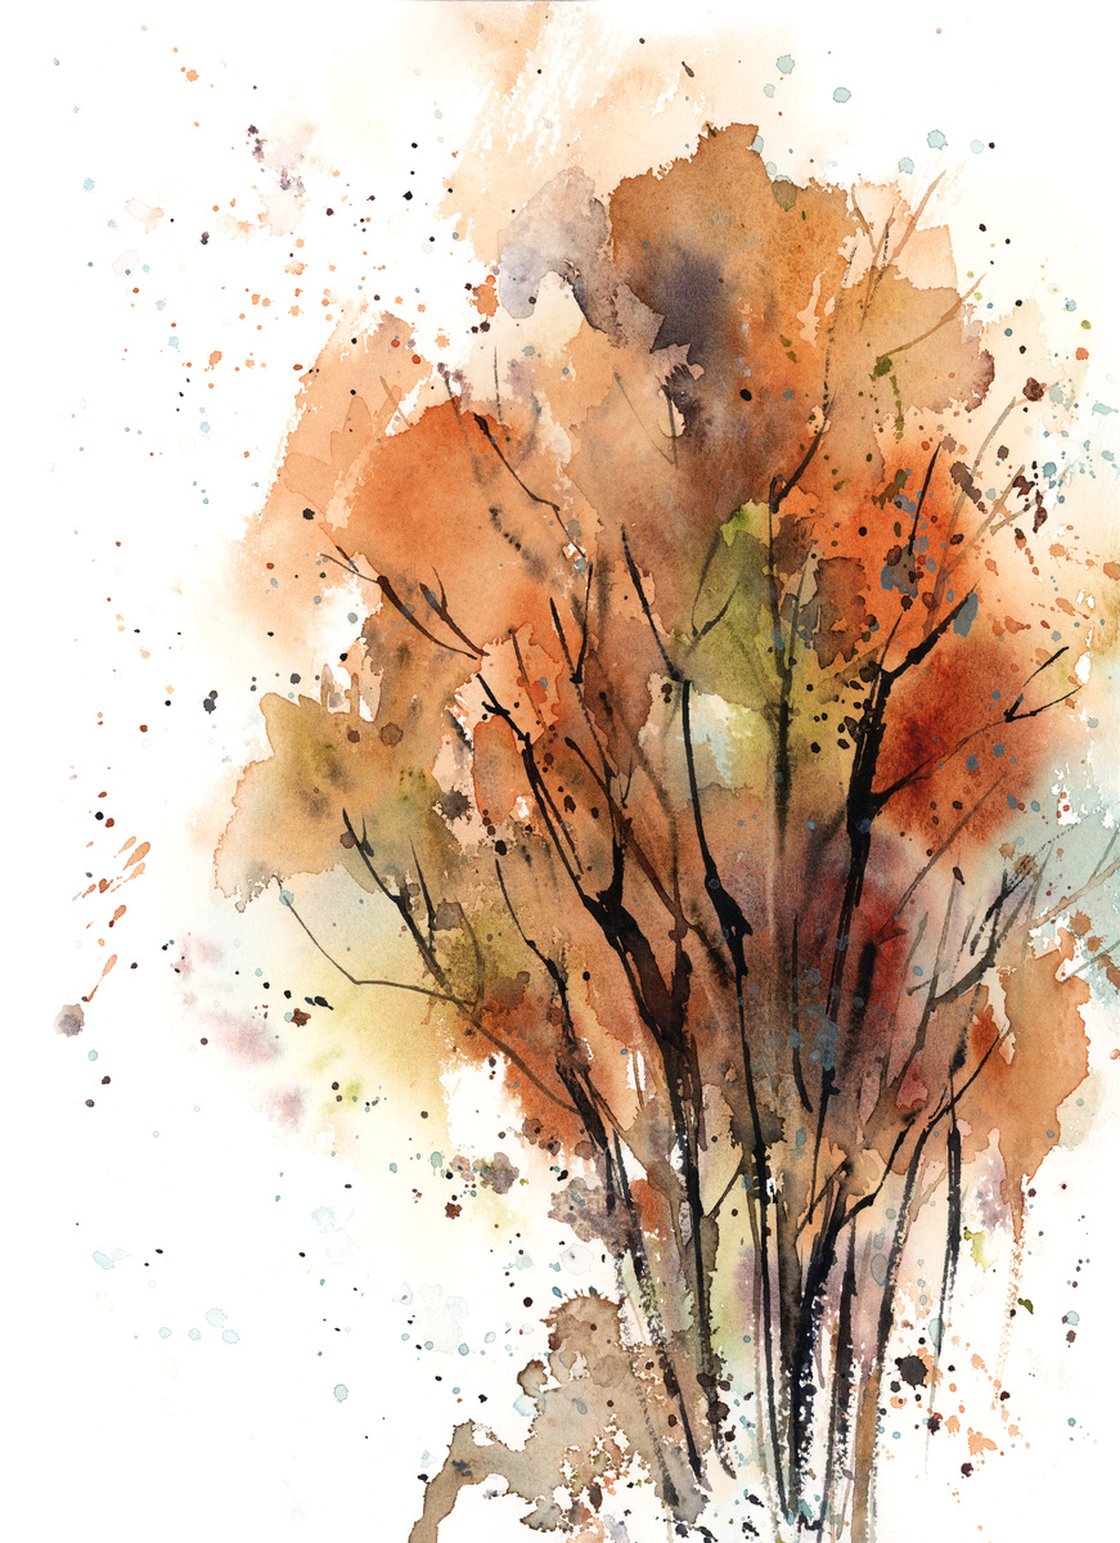 How To Paint A Tree In Watercolors, by Christopher P Jones